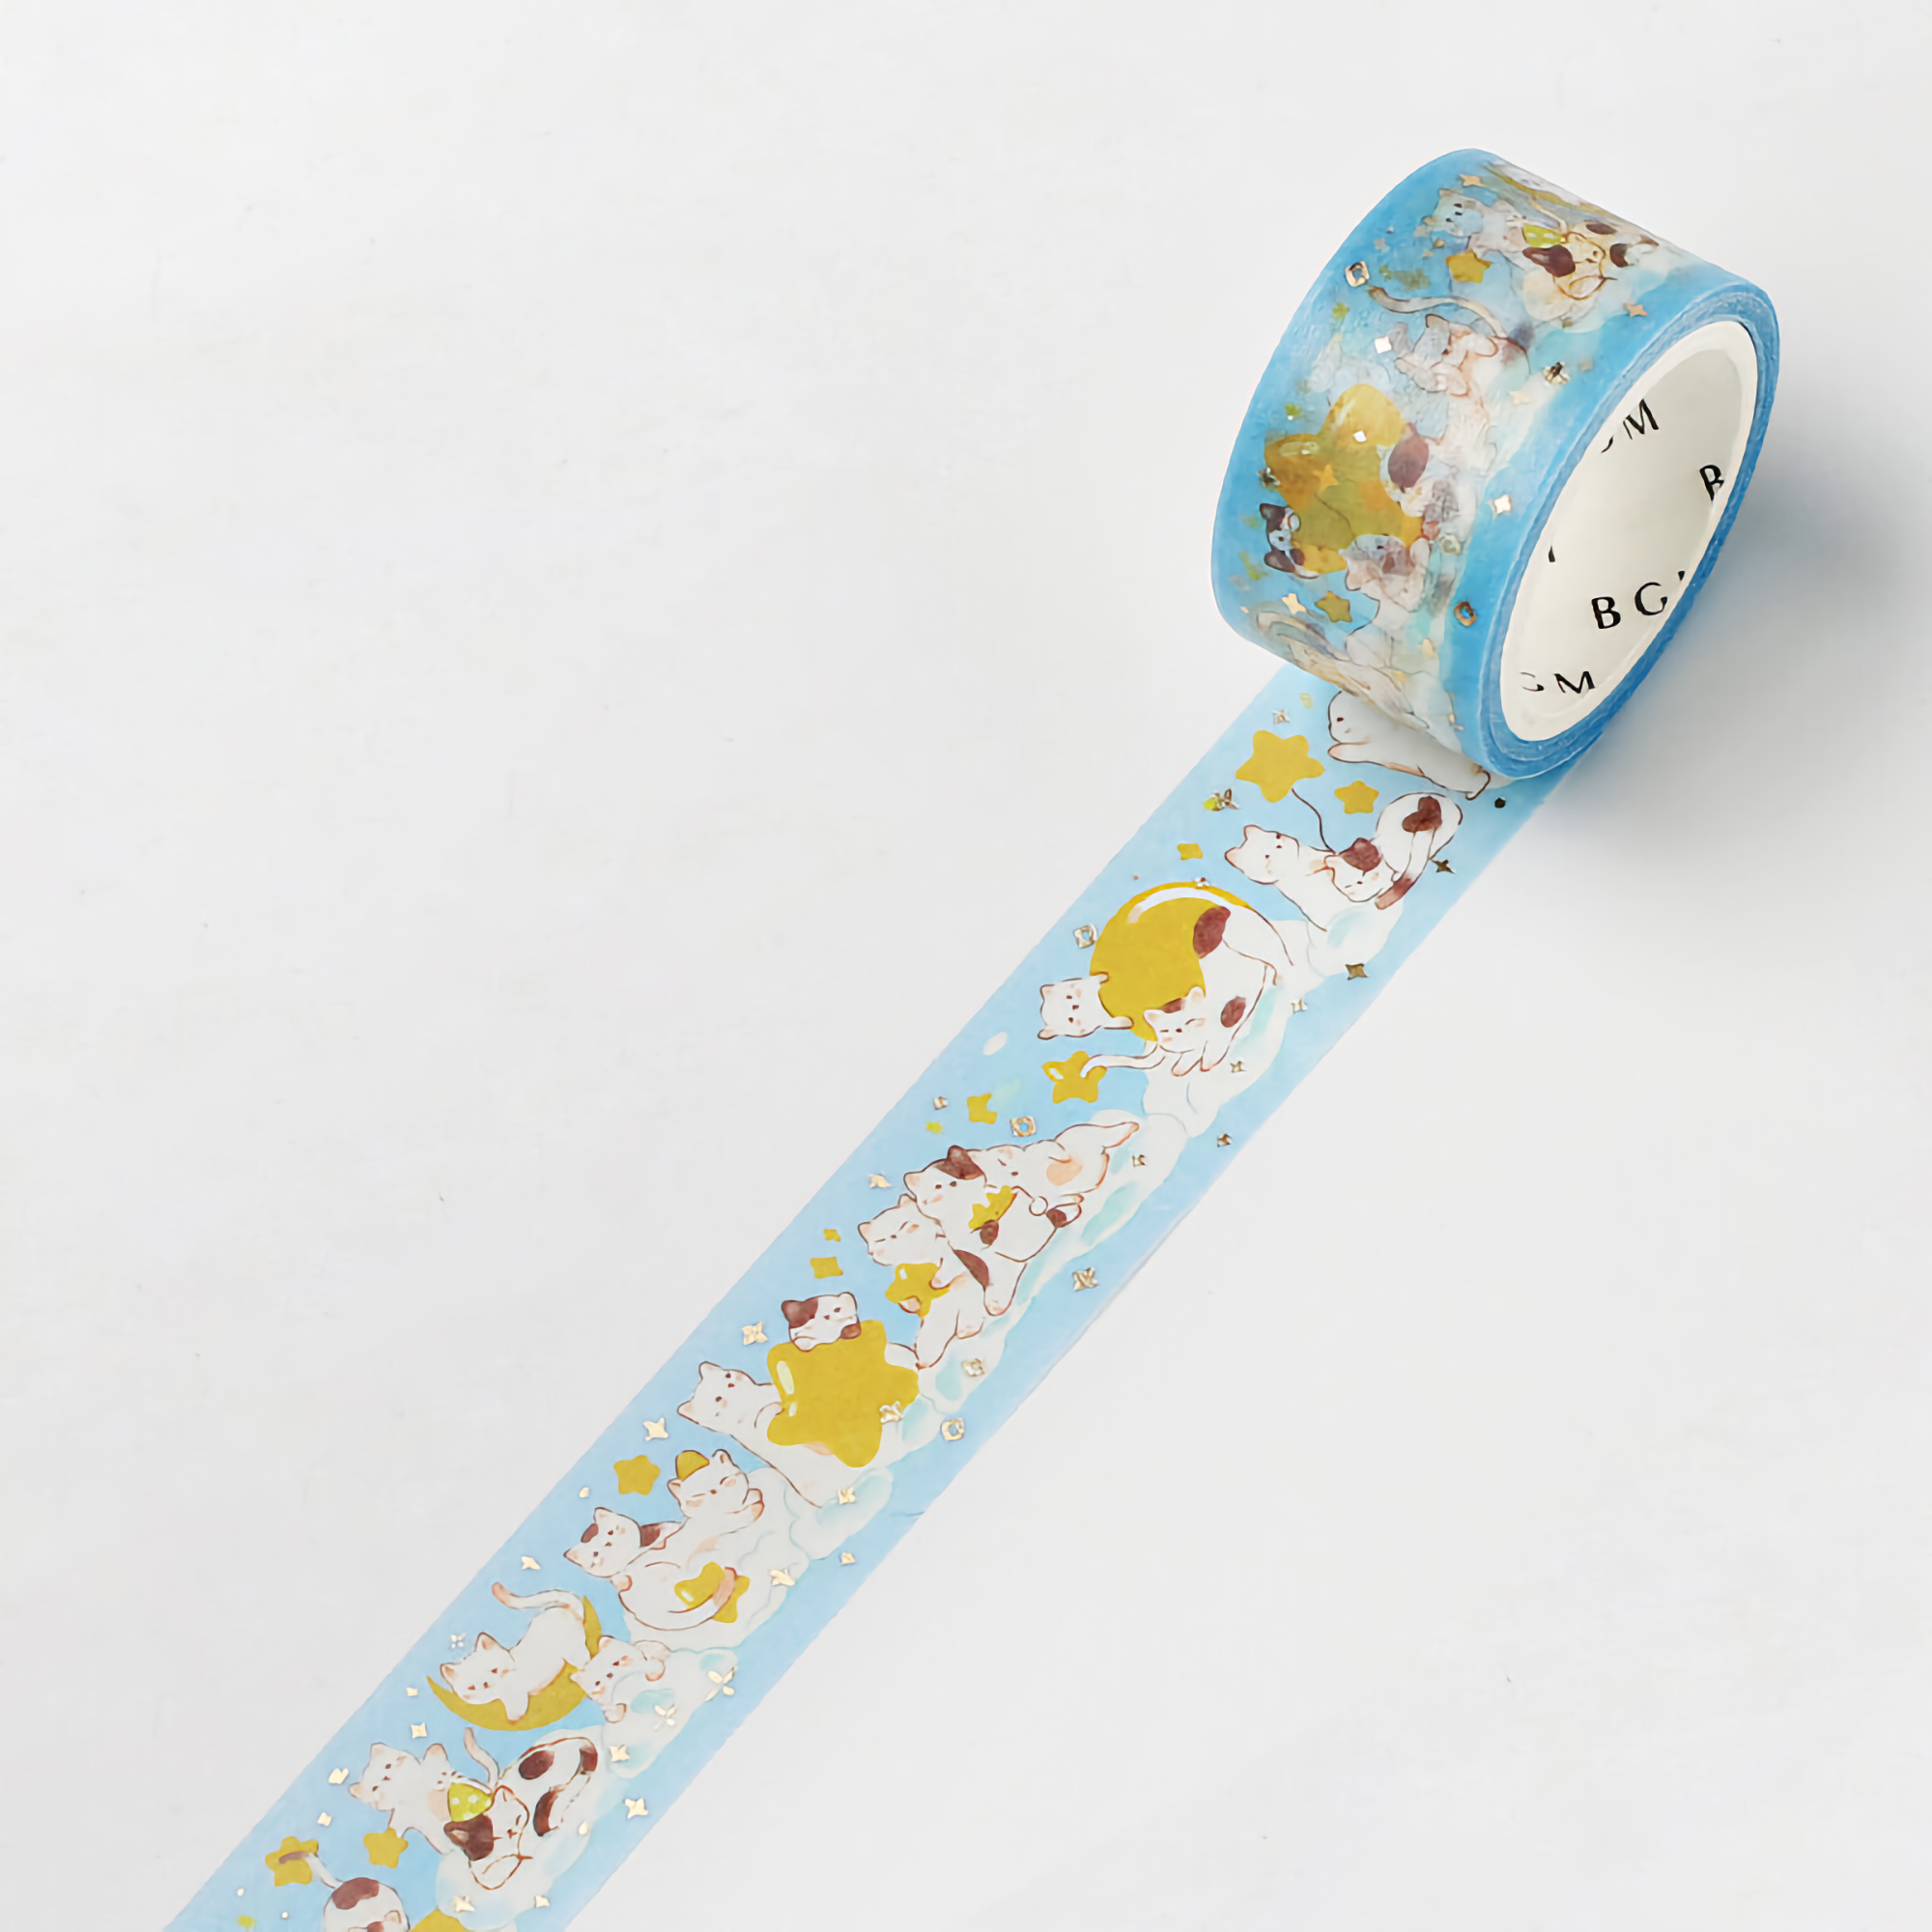 BGM Washi Tape Special Foil Animal Party Serenade 20 mm